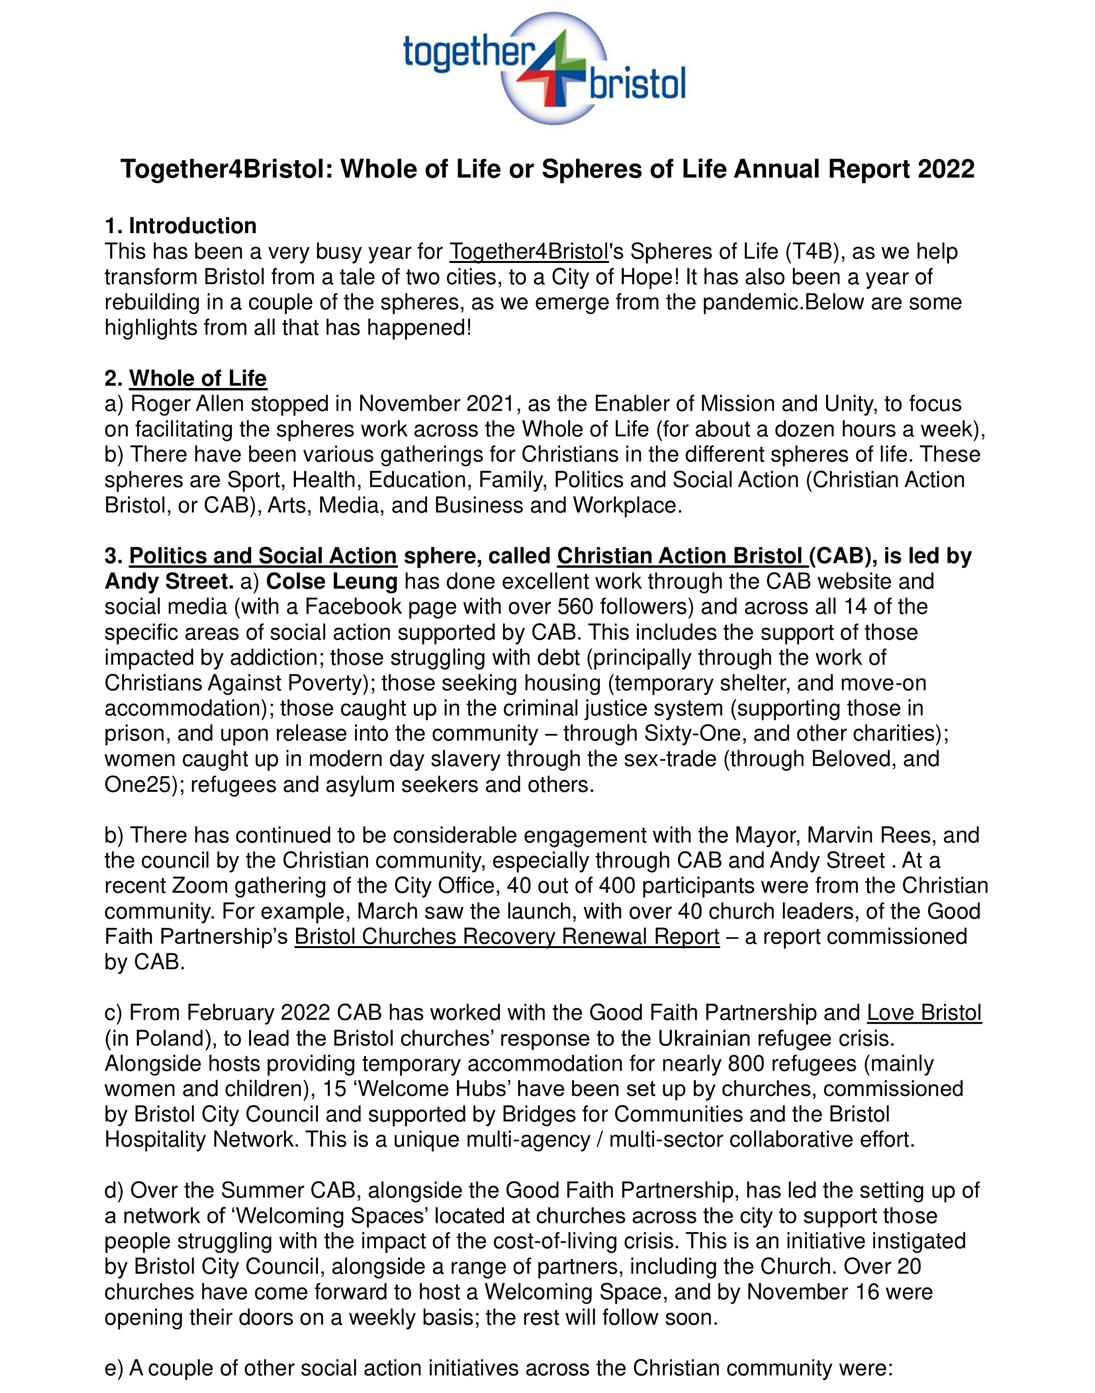 Annual Report T4B Whole of Lif